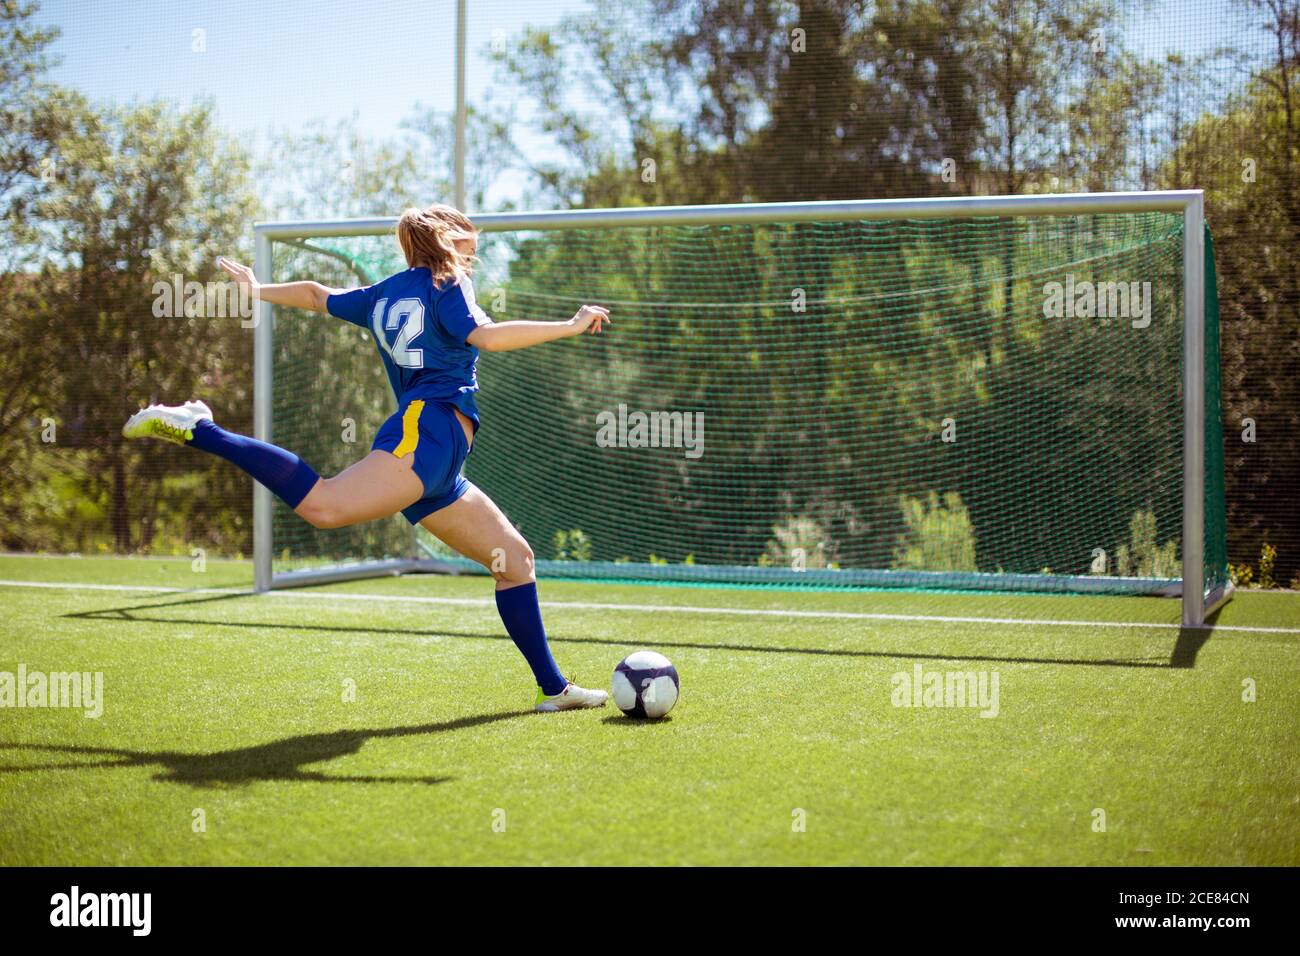 Side View Of Unrecognizable Female Athlete Shooting Ball Into Goal While Playing Football On Field Stock Photo Alamy